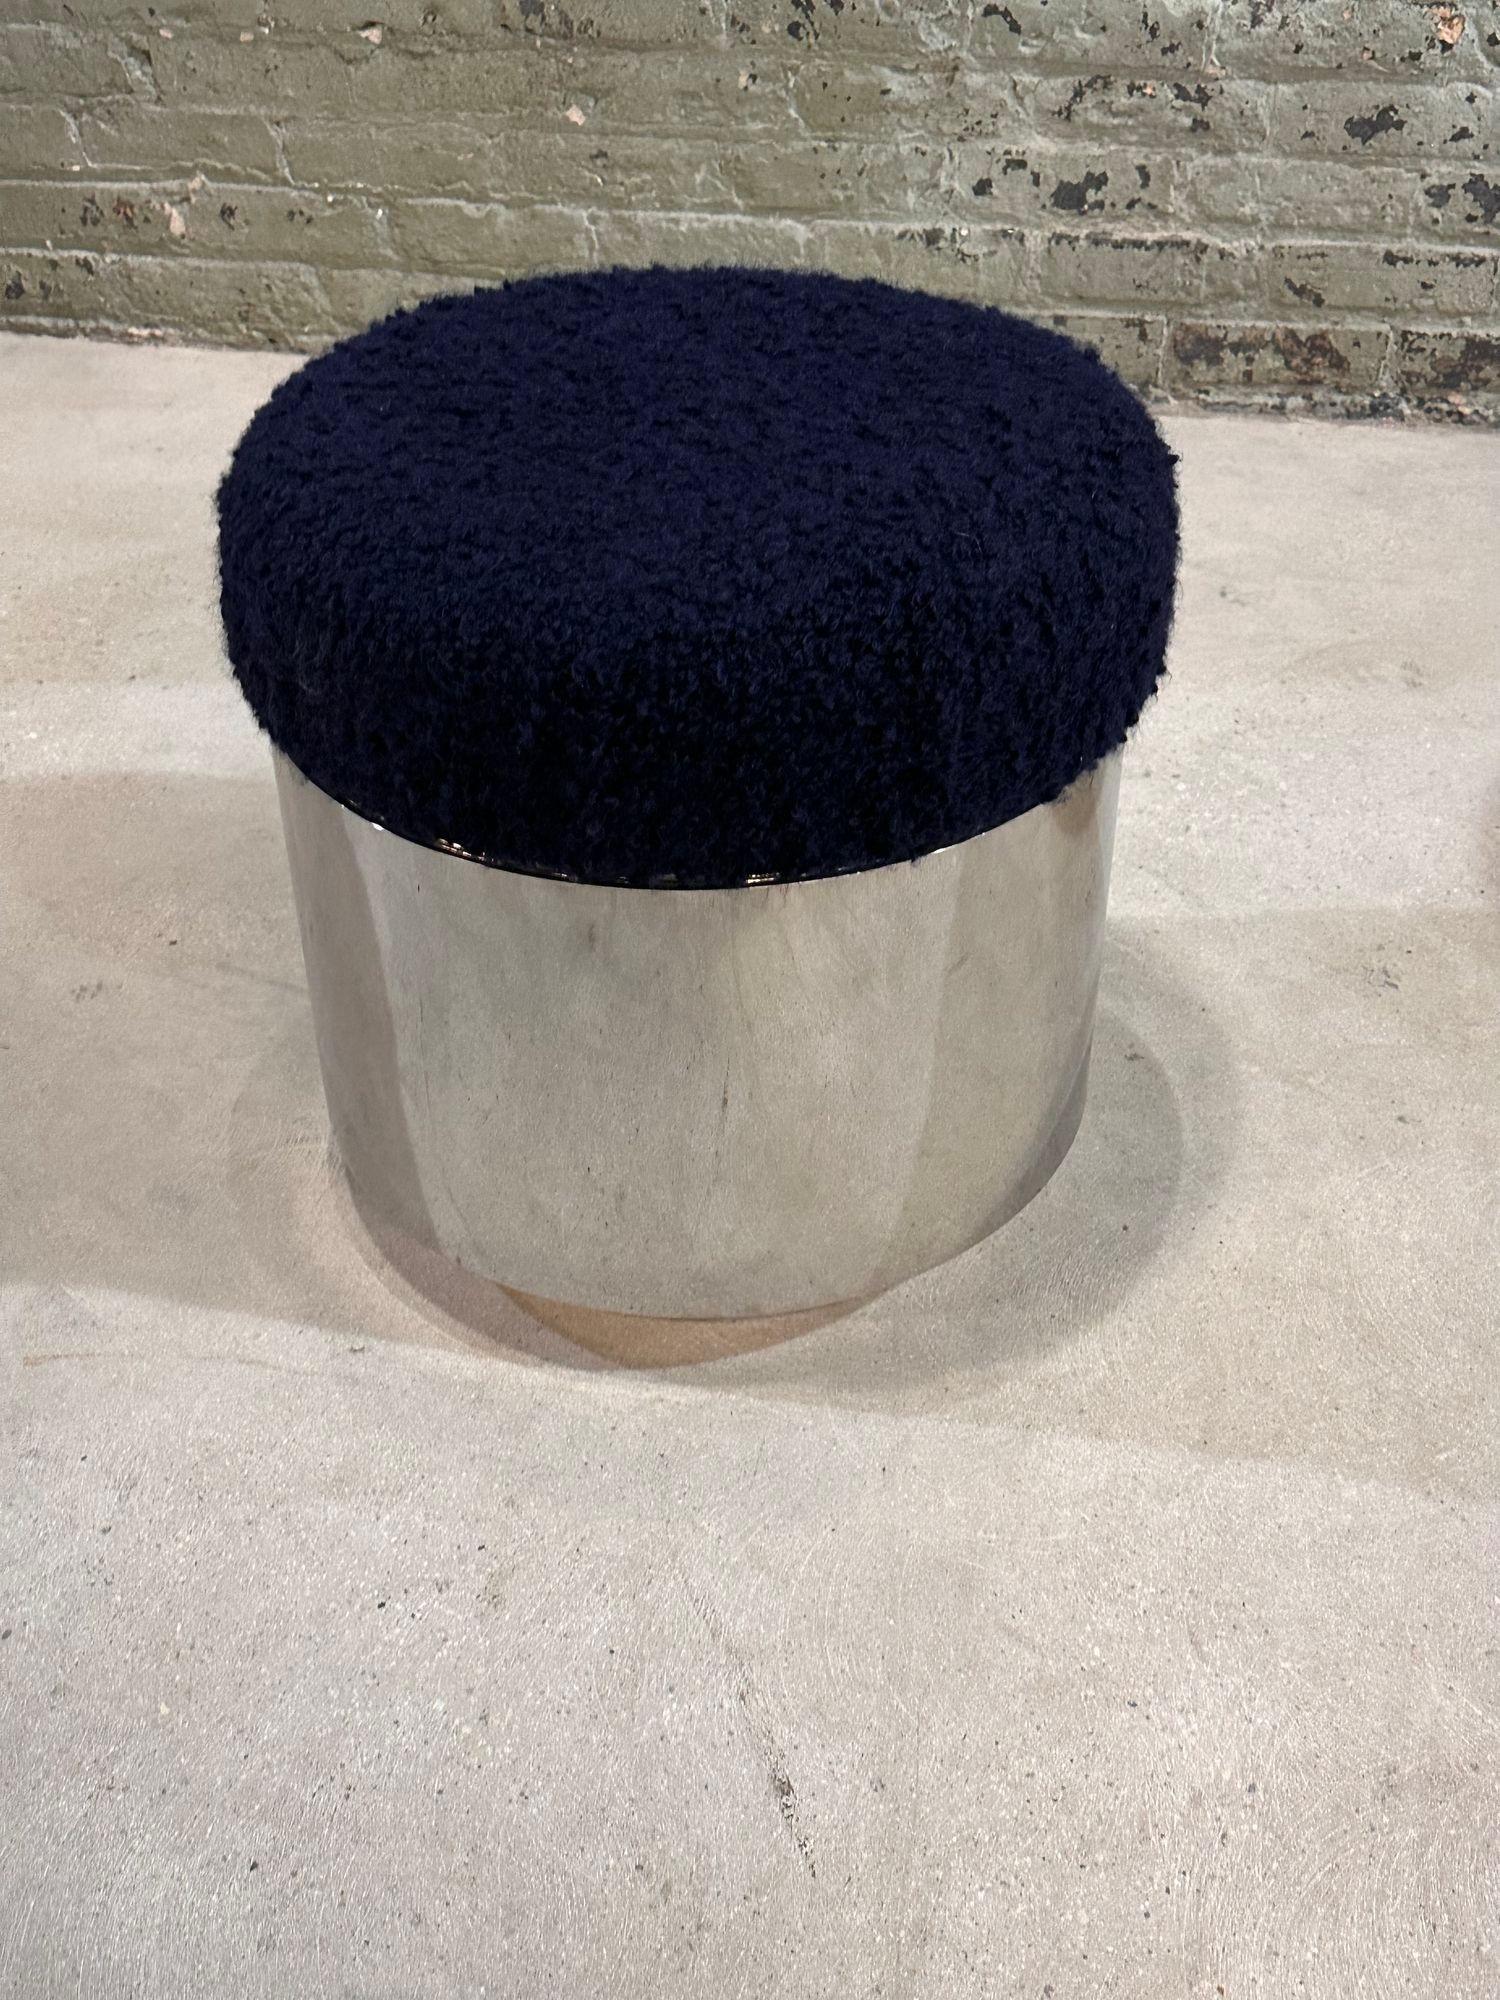 Chrome drum stool/ottoman with newly upholstered nubby blue boucle, 1960's
Measures 18